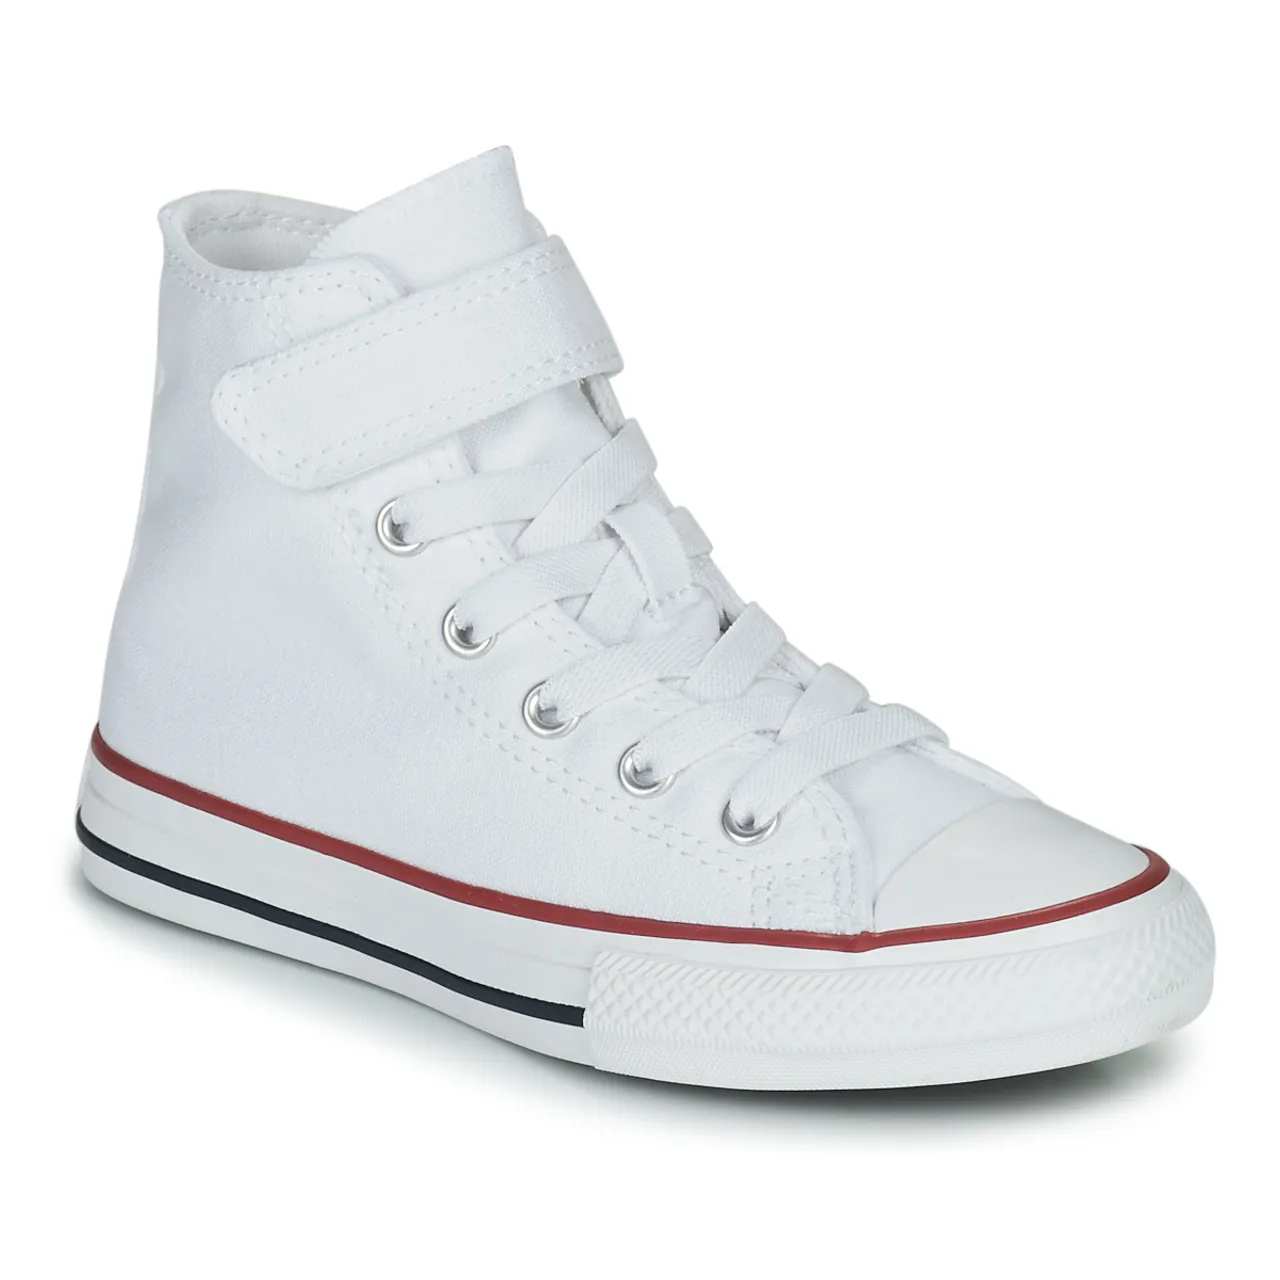 Converse  Chuck Taylor All Star 1V Foundation Hi  boys's Children's Shoes (High-top Trainers) in White